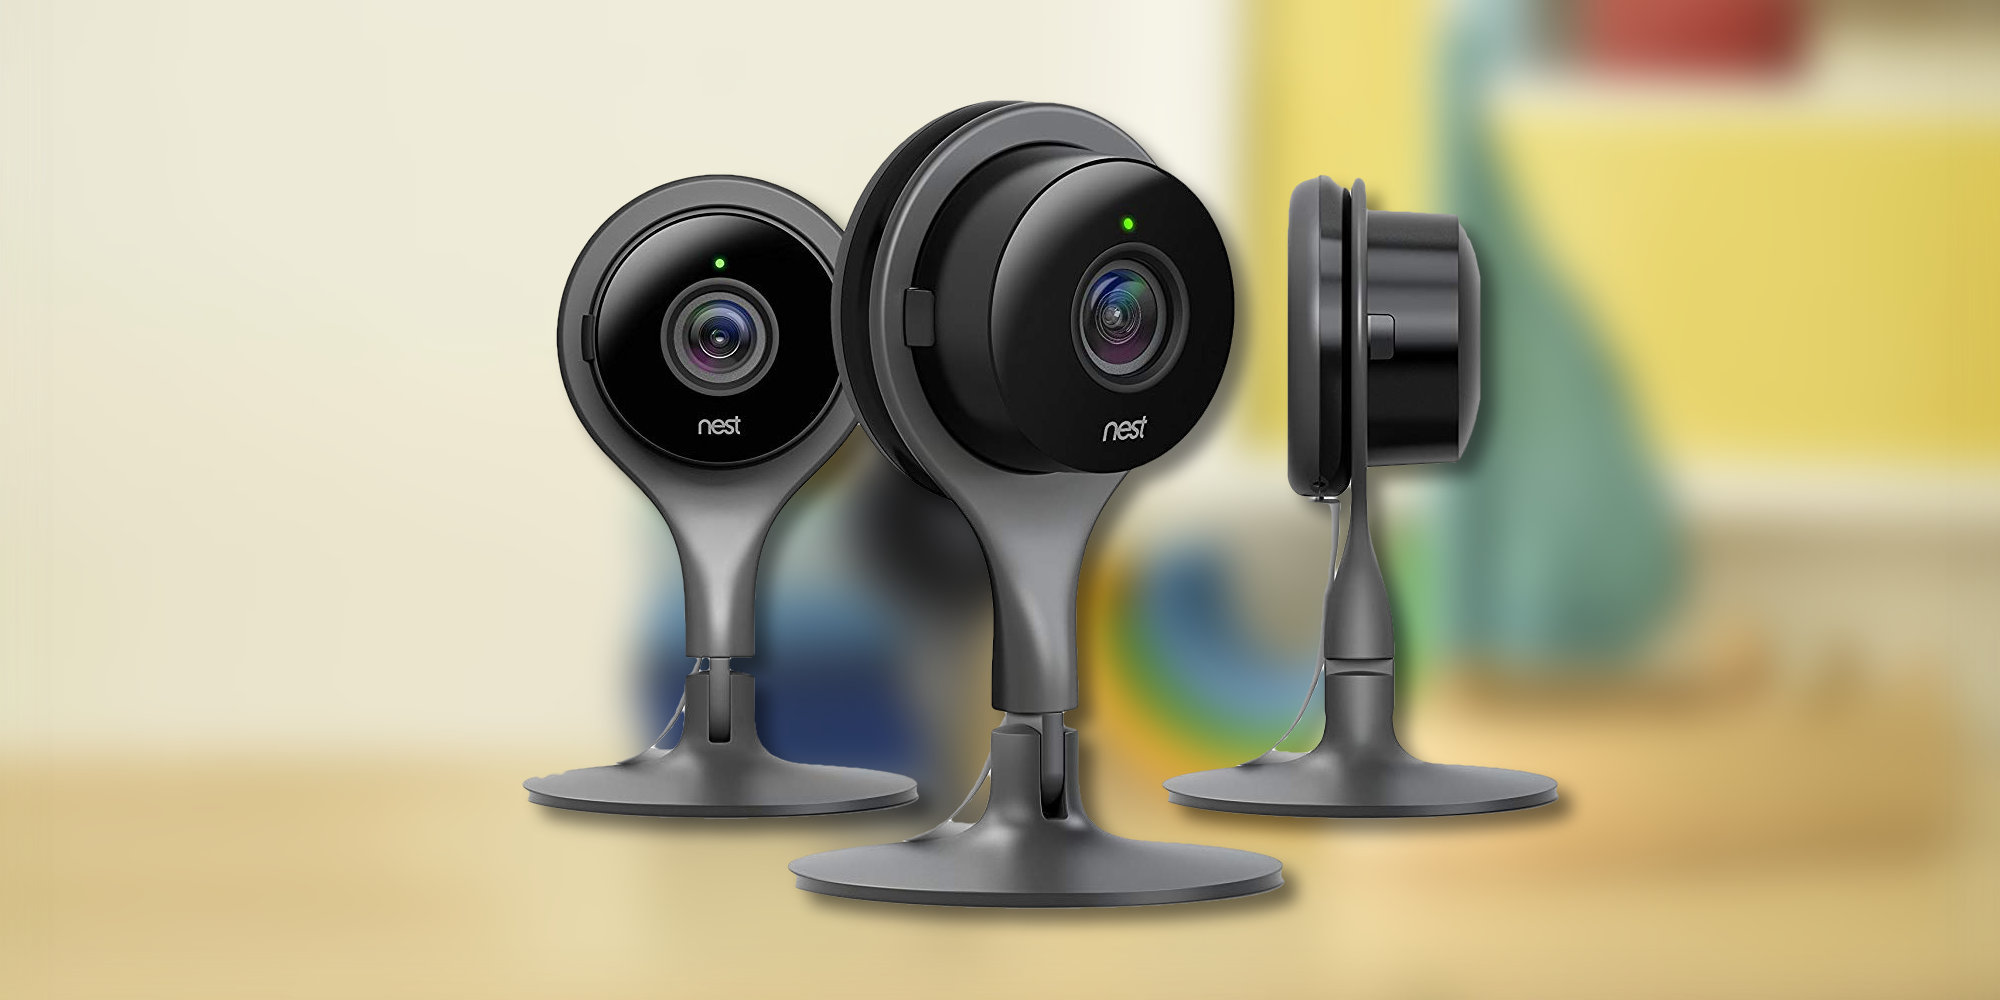 Snatch up three Google Nest Security Cameras for $316.50 (Save $80